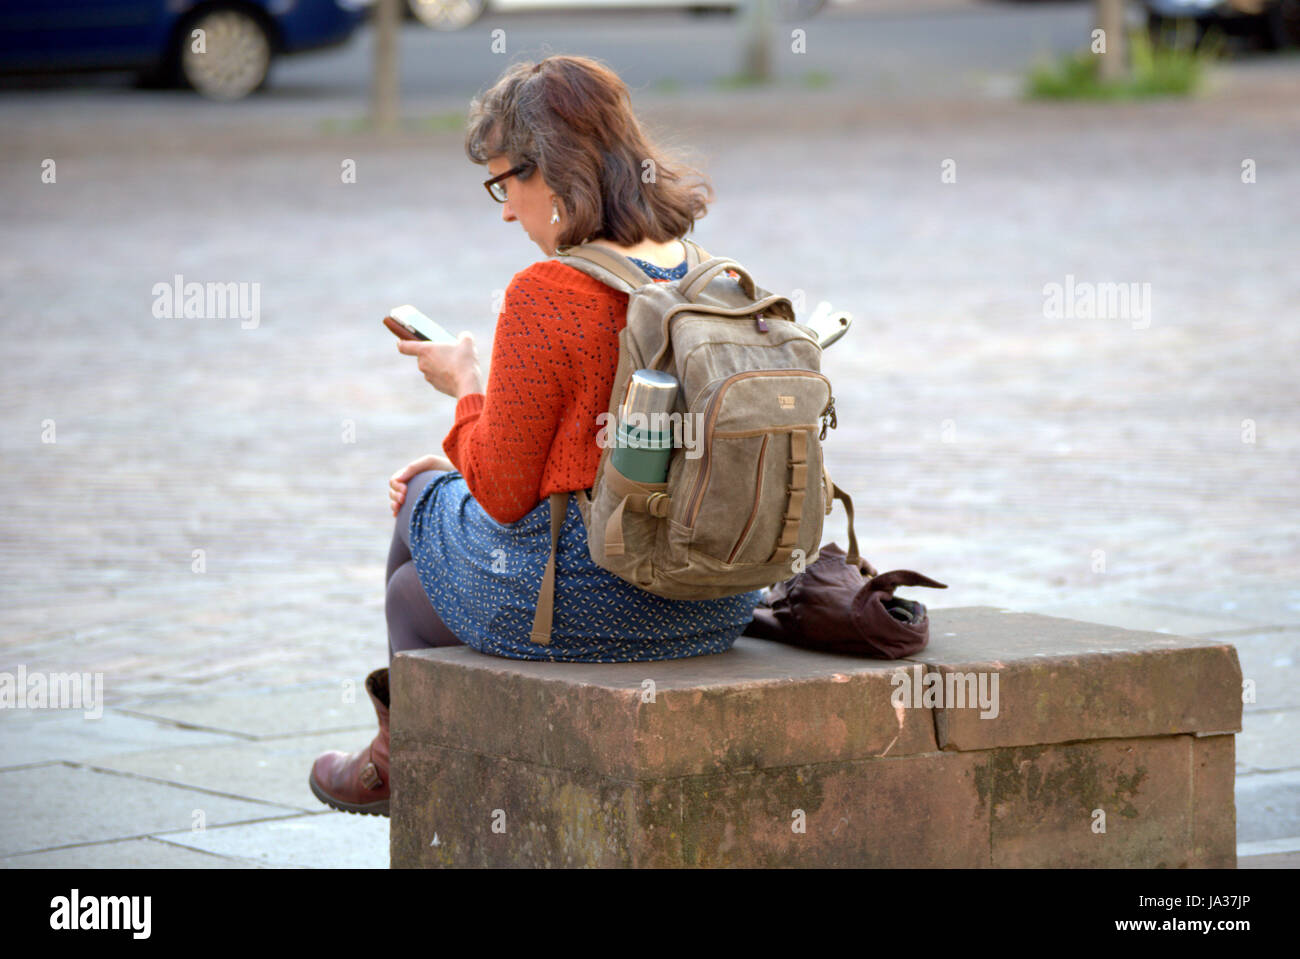 young person sitting on a bench viewed from behind using smartphone texting Stock Photo